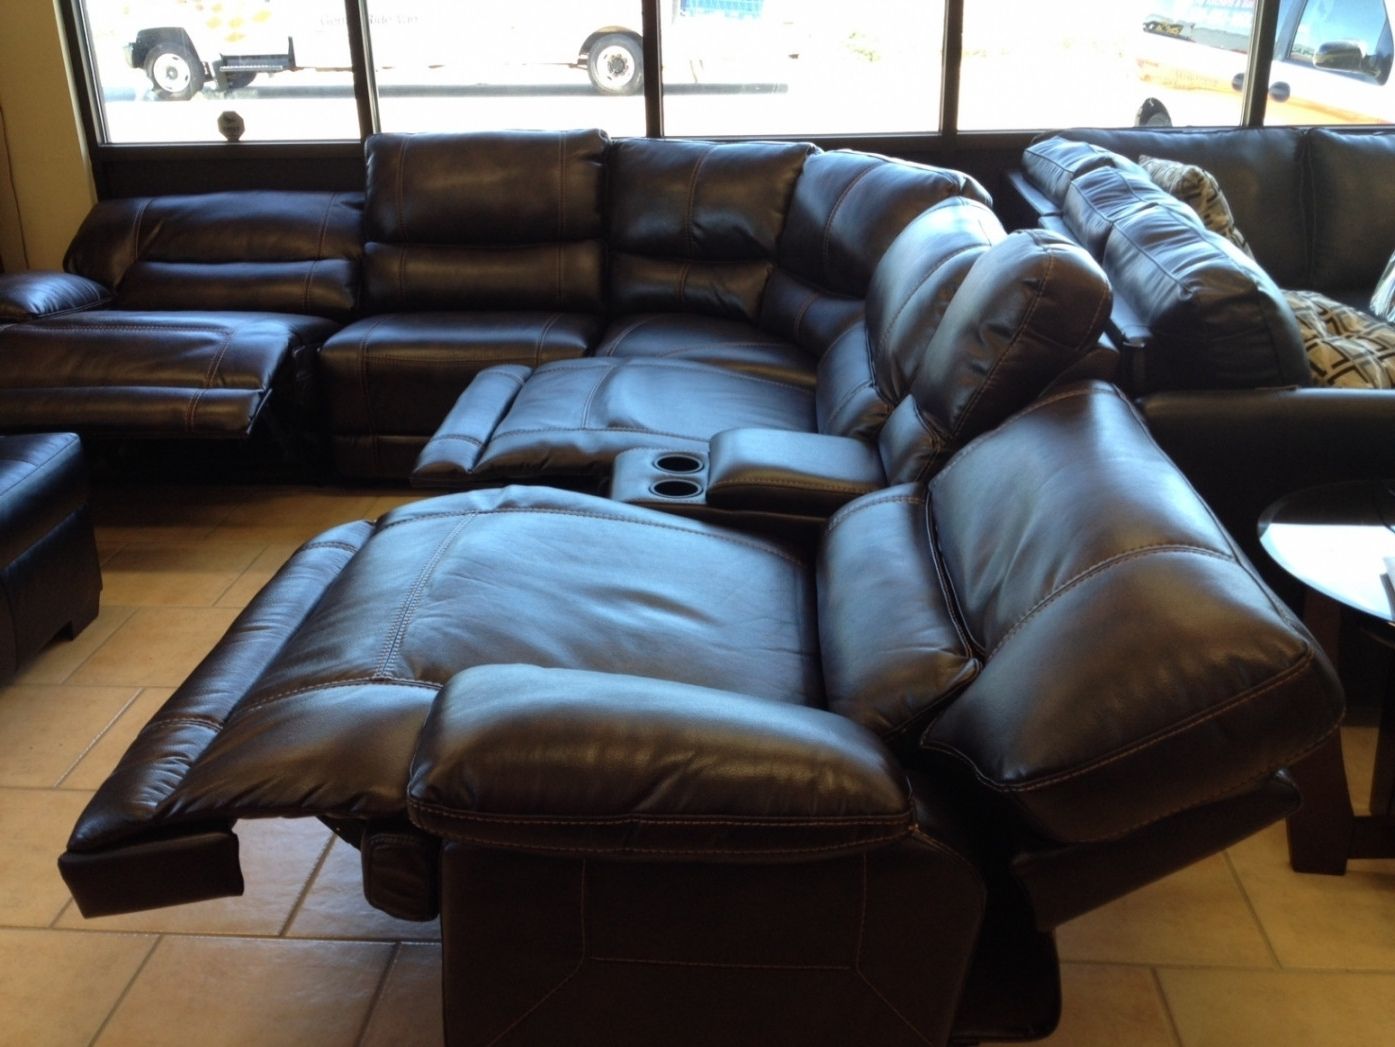 Sectional Sofas With Electric Recliners Intended For Latest Sectional Sofas Electric Recliners (View 2 of 15)